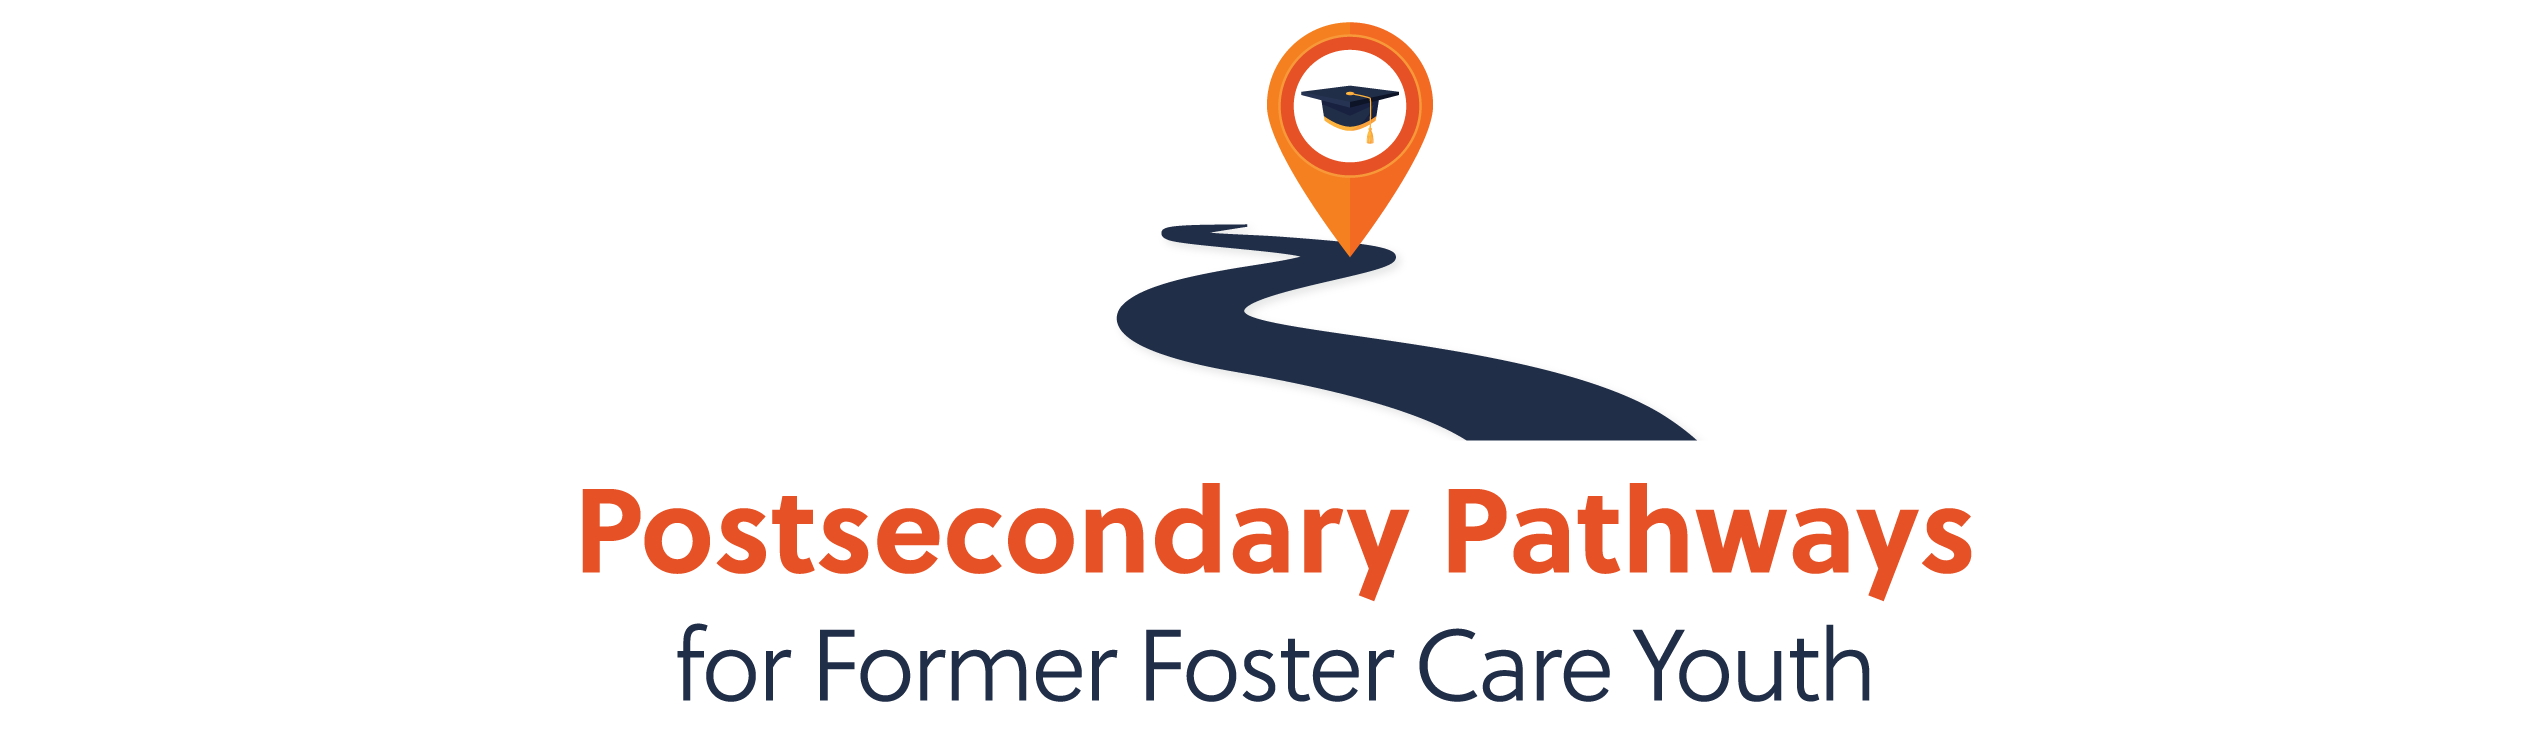 postsecondary-pathways-for-former-foster-care-youth